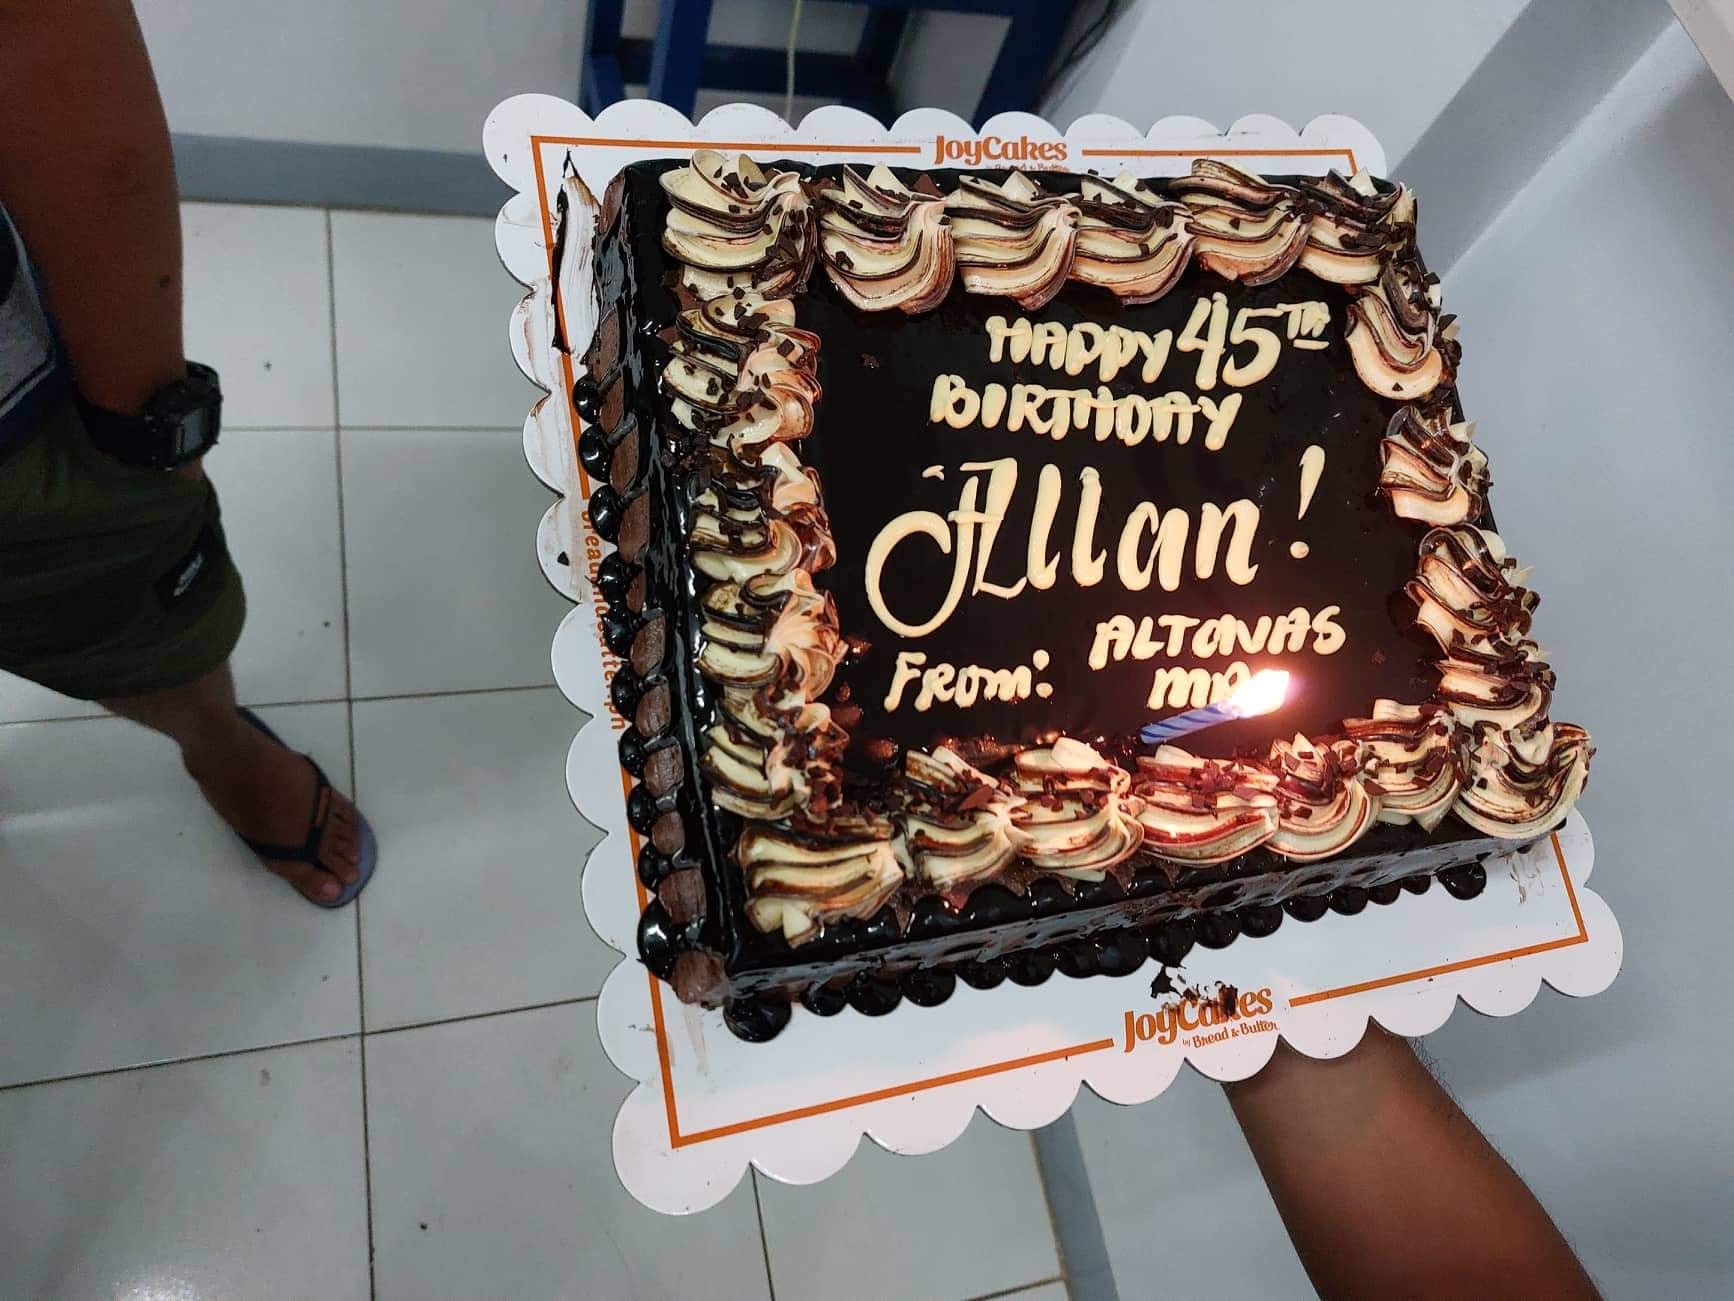 Suspect who was arrested on his birthday receives birthday cake surprise from police 03